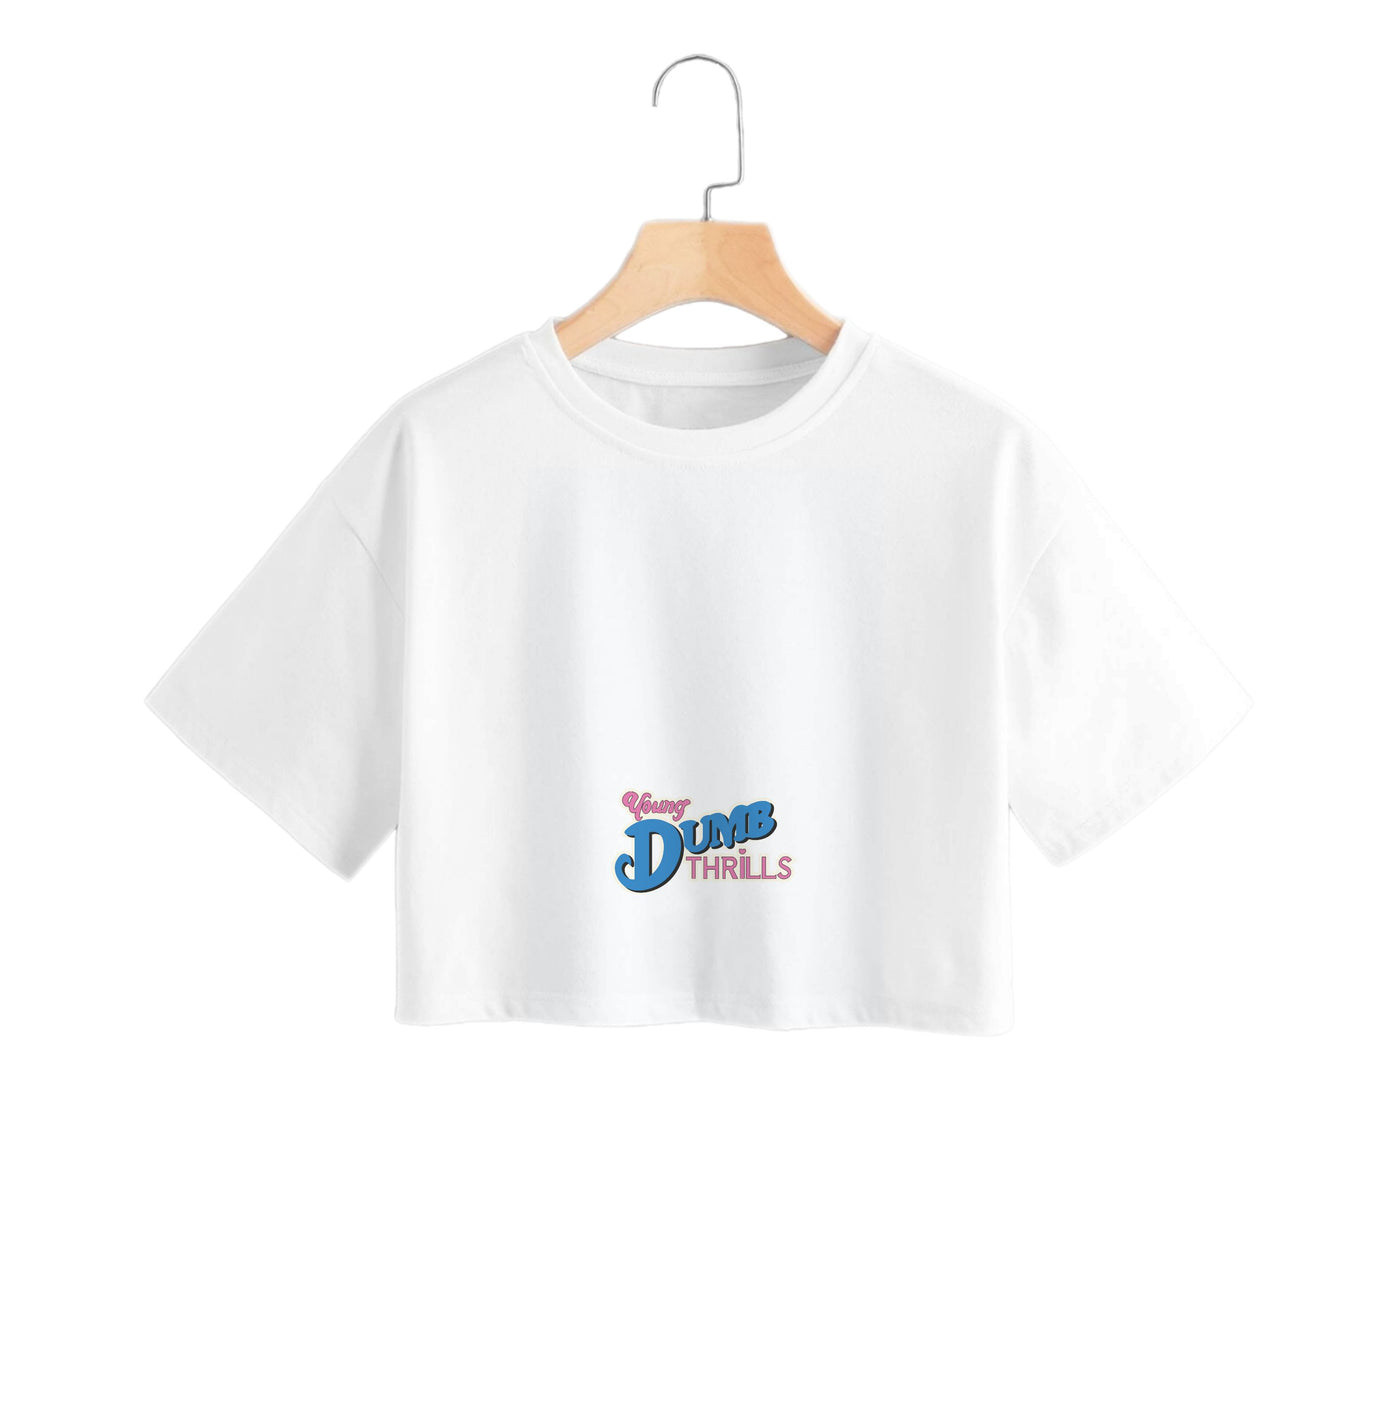 Young Dumb Thrills - Obviously - McFly Crop Top